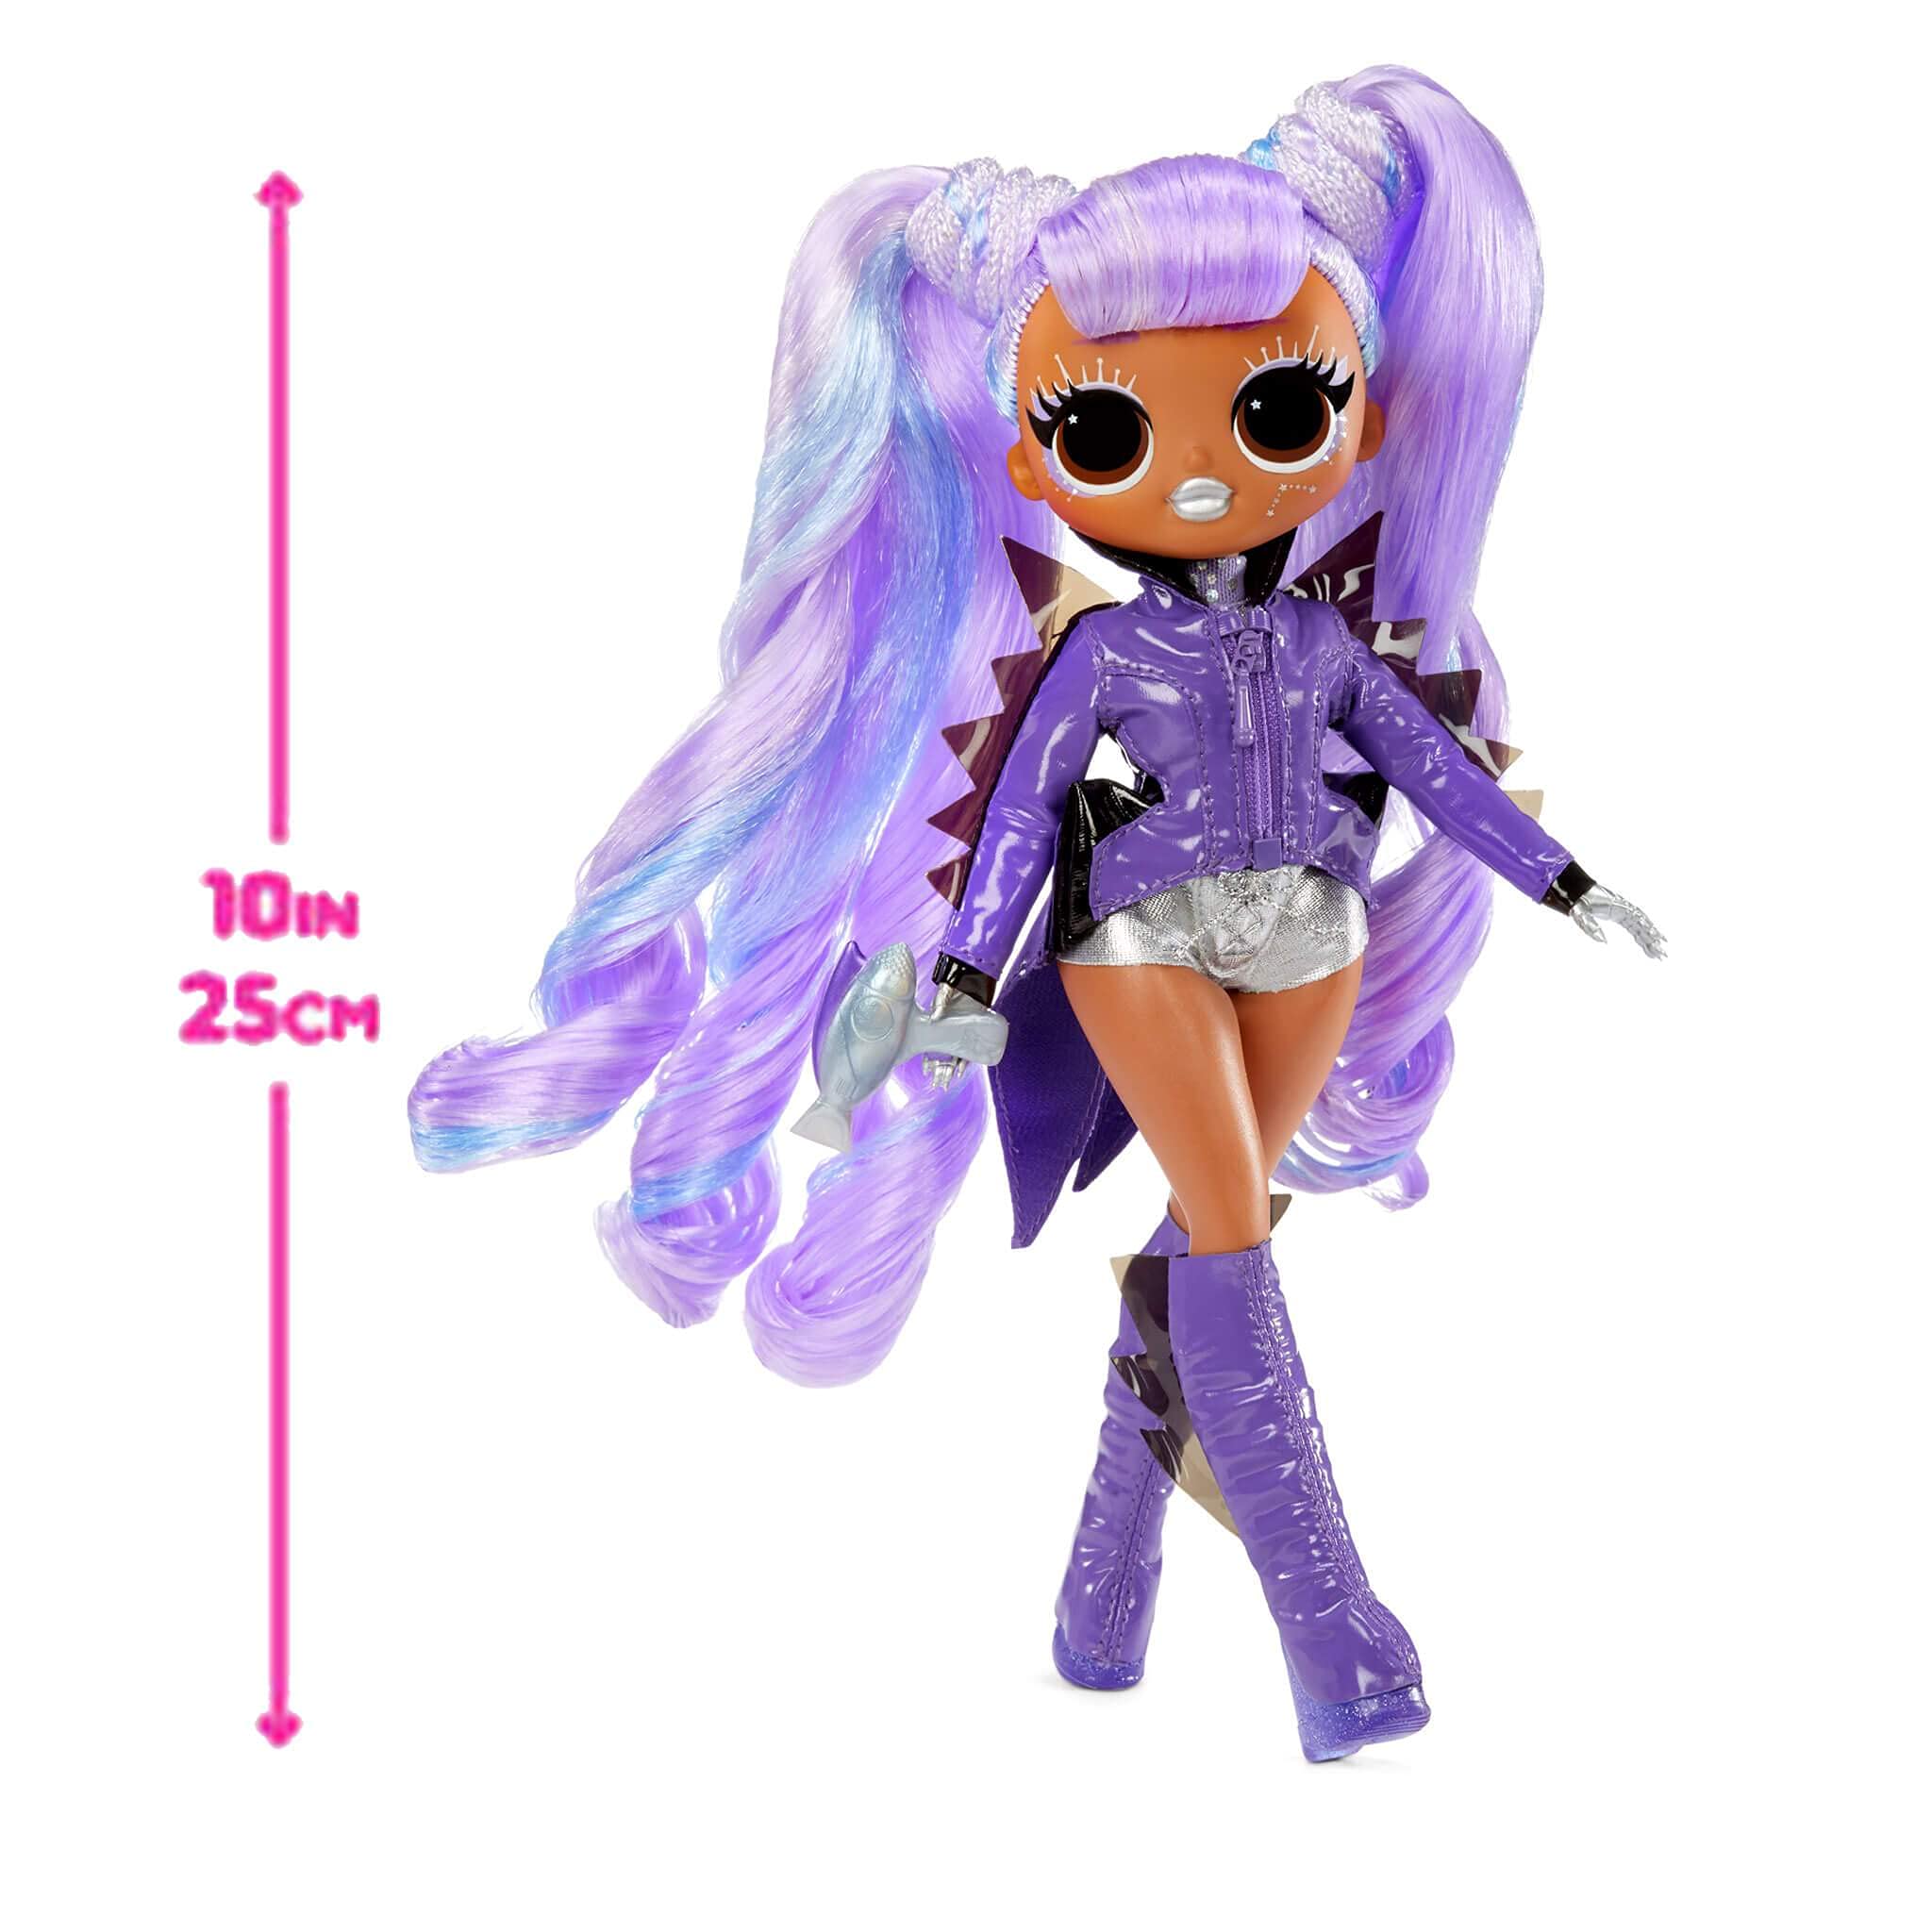 LOL Surprise OMG Movie Magic Gamma Babe Fashion Doll - 25 Surprises, 2 Outfits, 3D Glasses, Accessories, Playset, Ages 4-7+